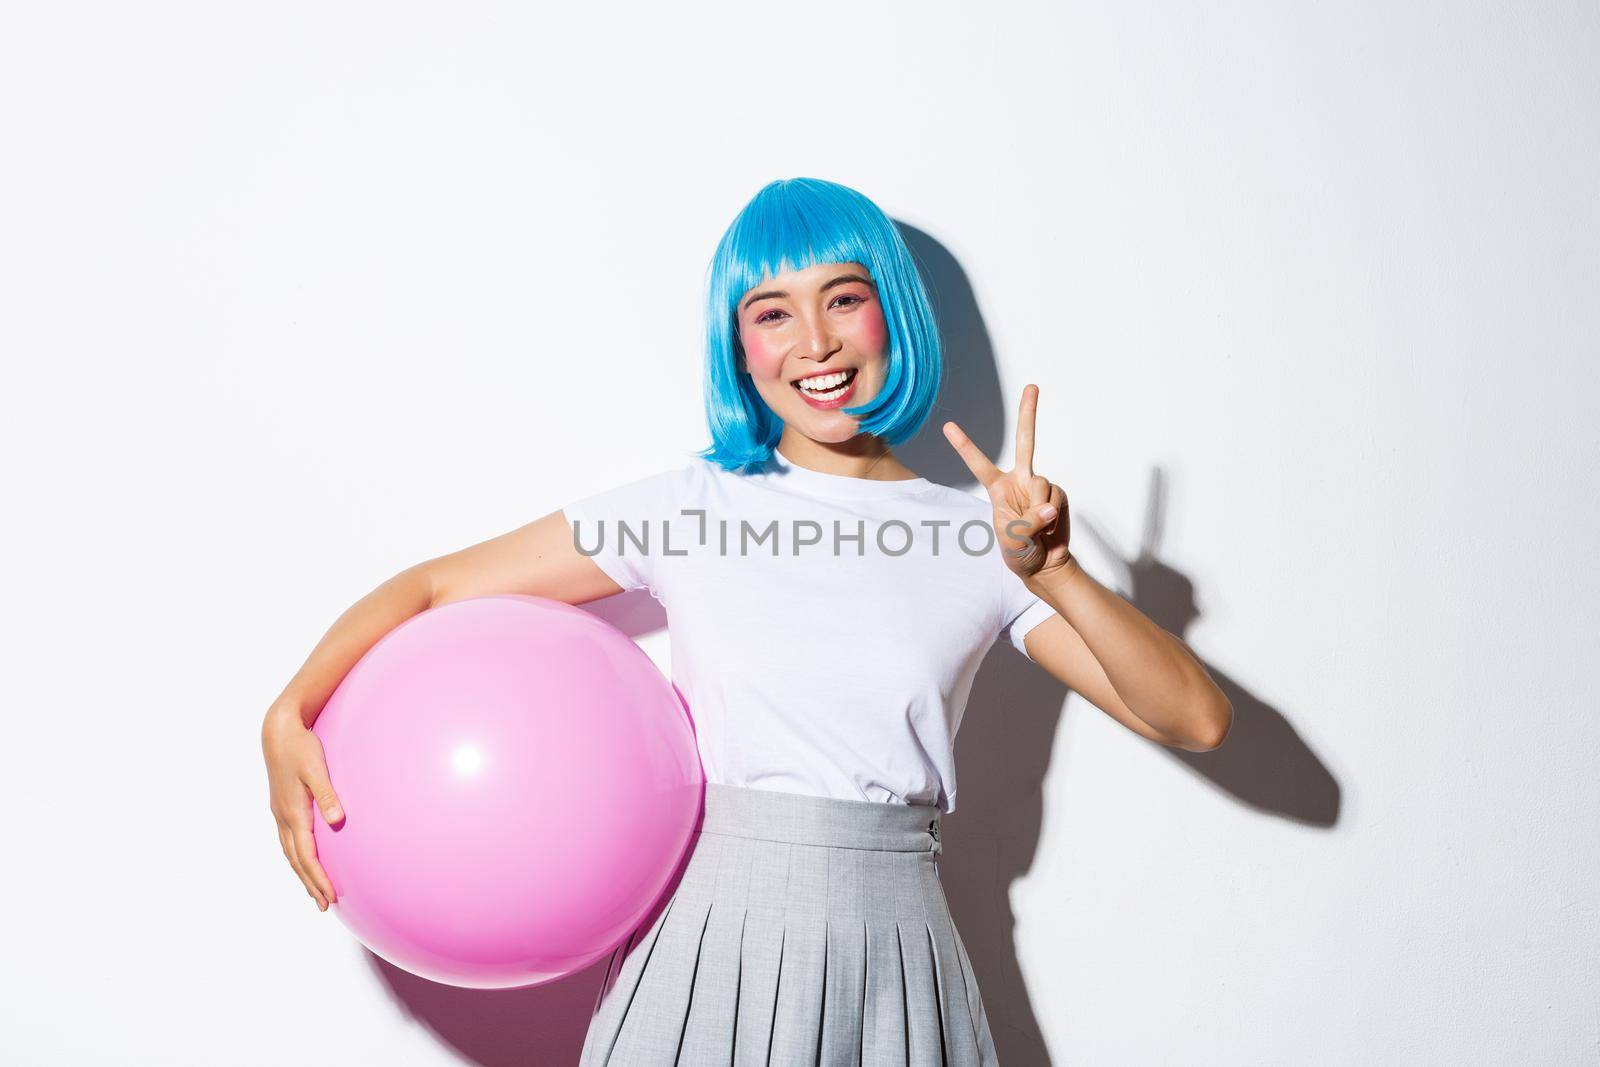 Image of cute asian girl in blue wig and halloween costume, showing peace gesture, holding large pink balloon.